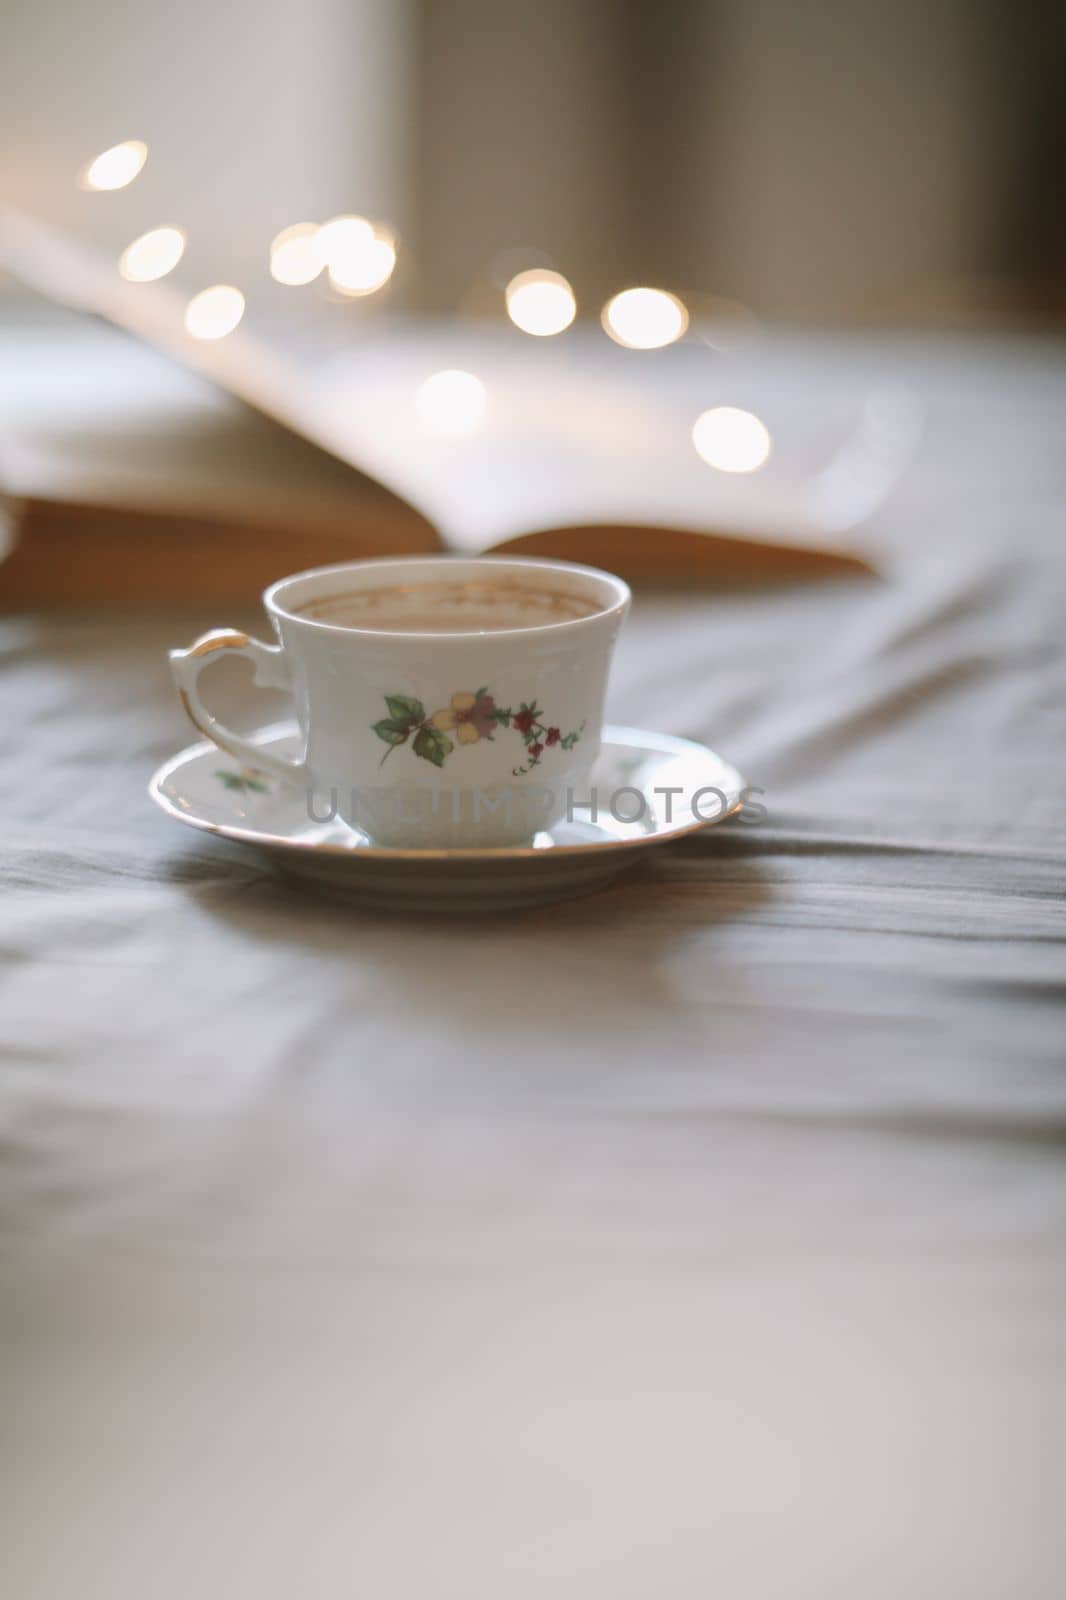 Spring still life. Breakfast in bed. White bedroom. Sweet home. Book and coffee cup